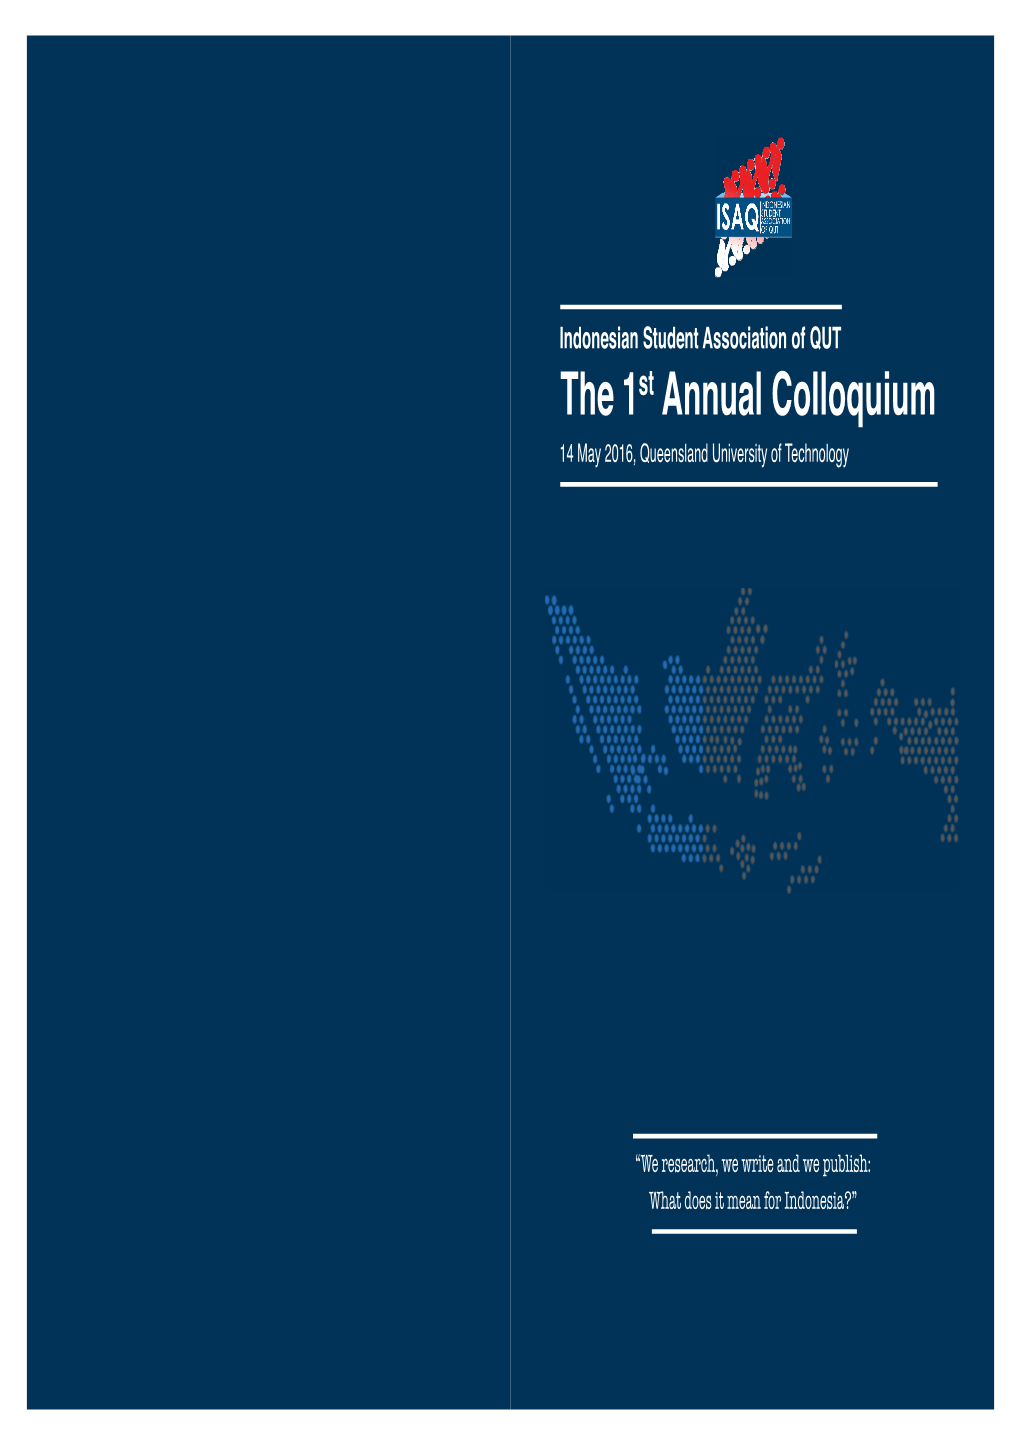 The 1St Annual Colloquium 14 May 2016, Queensland University of Technology